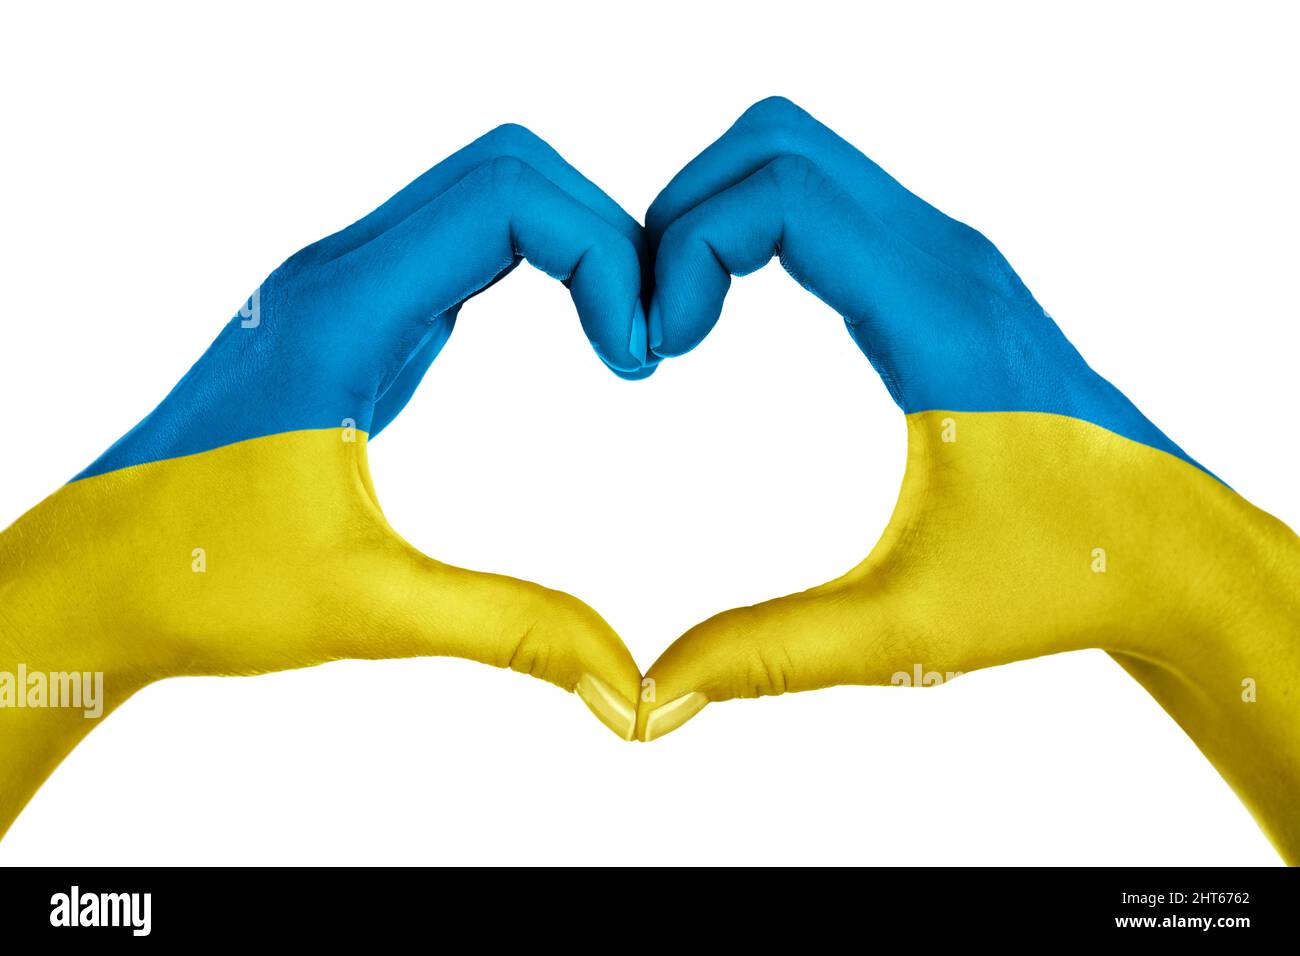 Female hands, painted in the ukraine flag,  forming heart shape isolated on white background Stock Photo